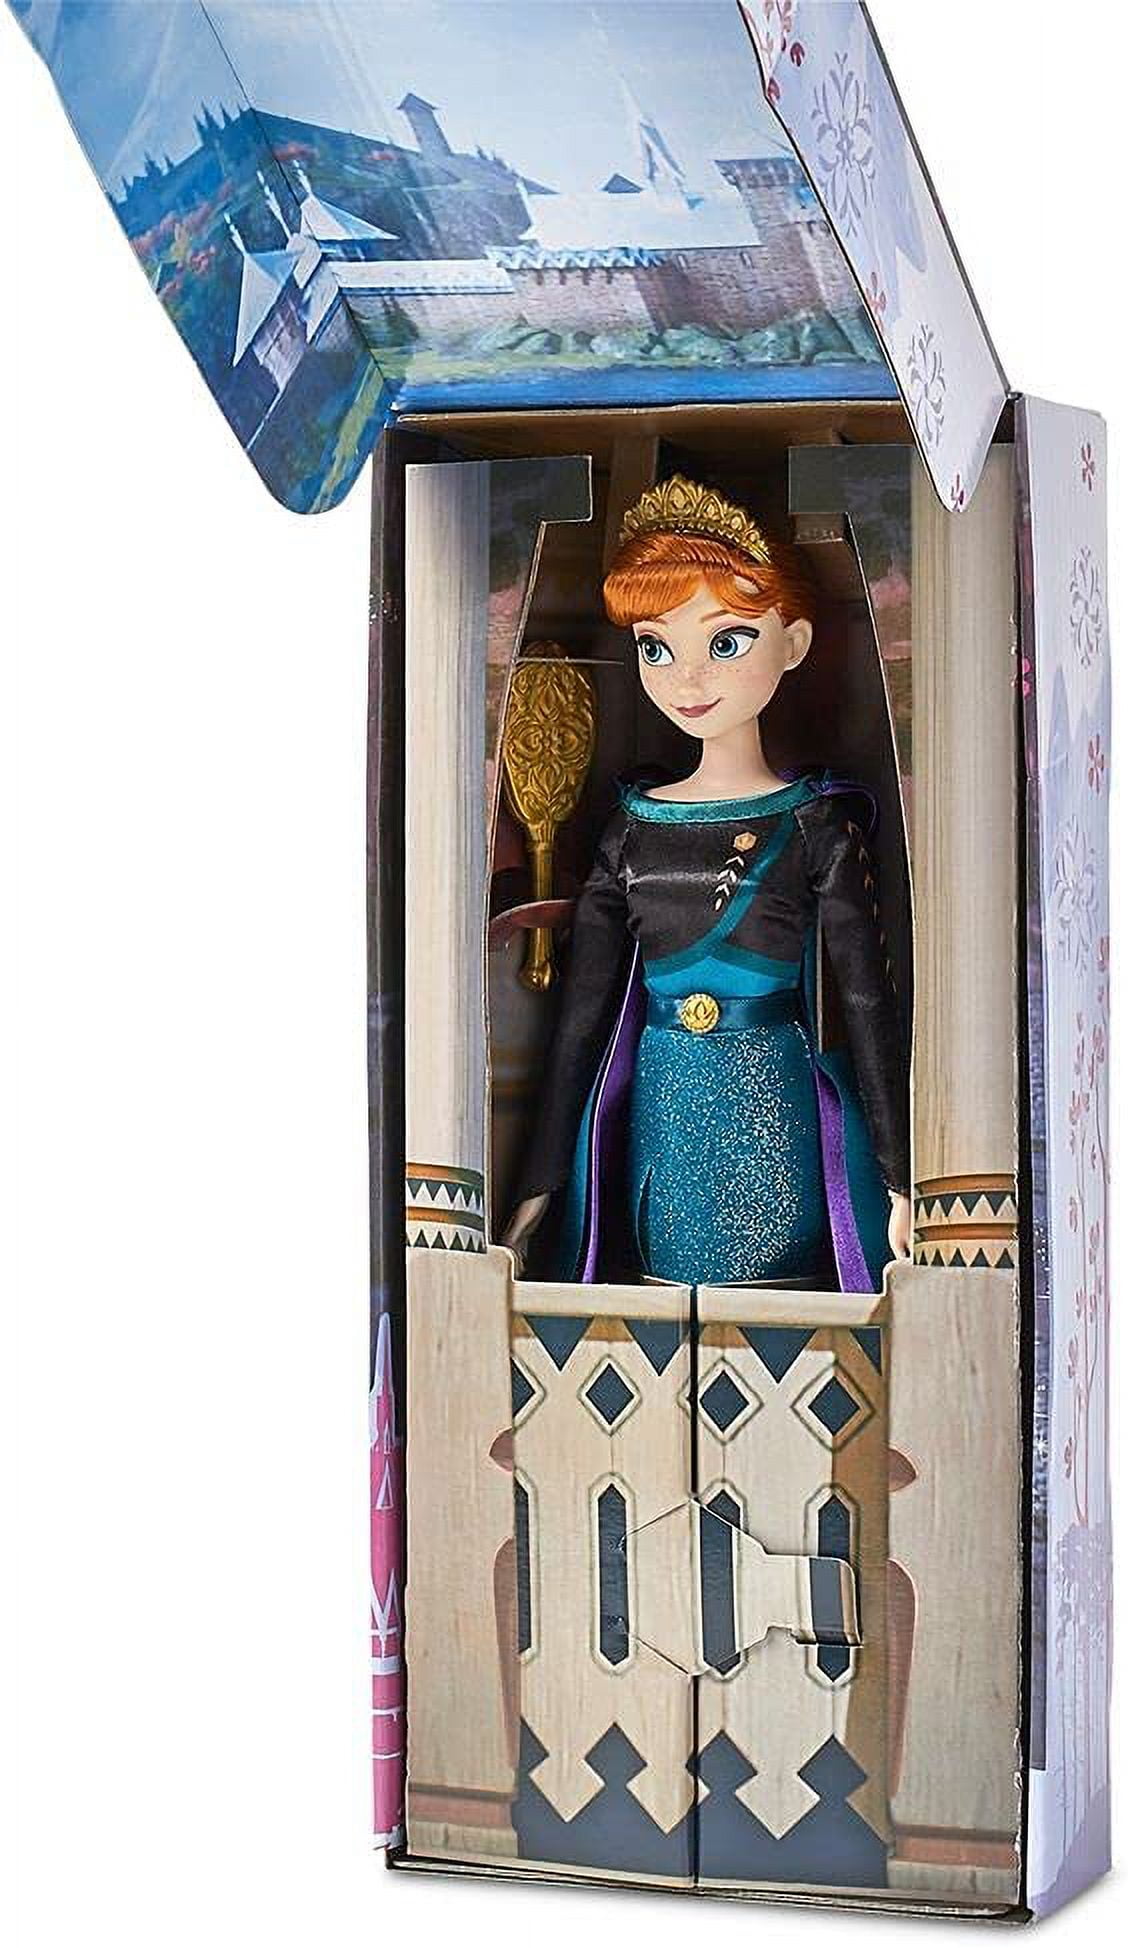 Disney Store Official Princess Elsa Classic Doll for Kids, Frozen 2, 11½  Inches, Includes Golden Brush with Molded Details, Fully Posable Toy Figure